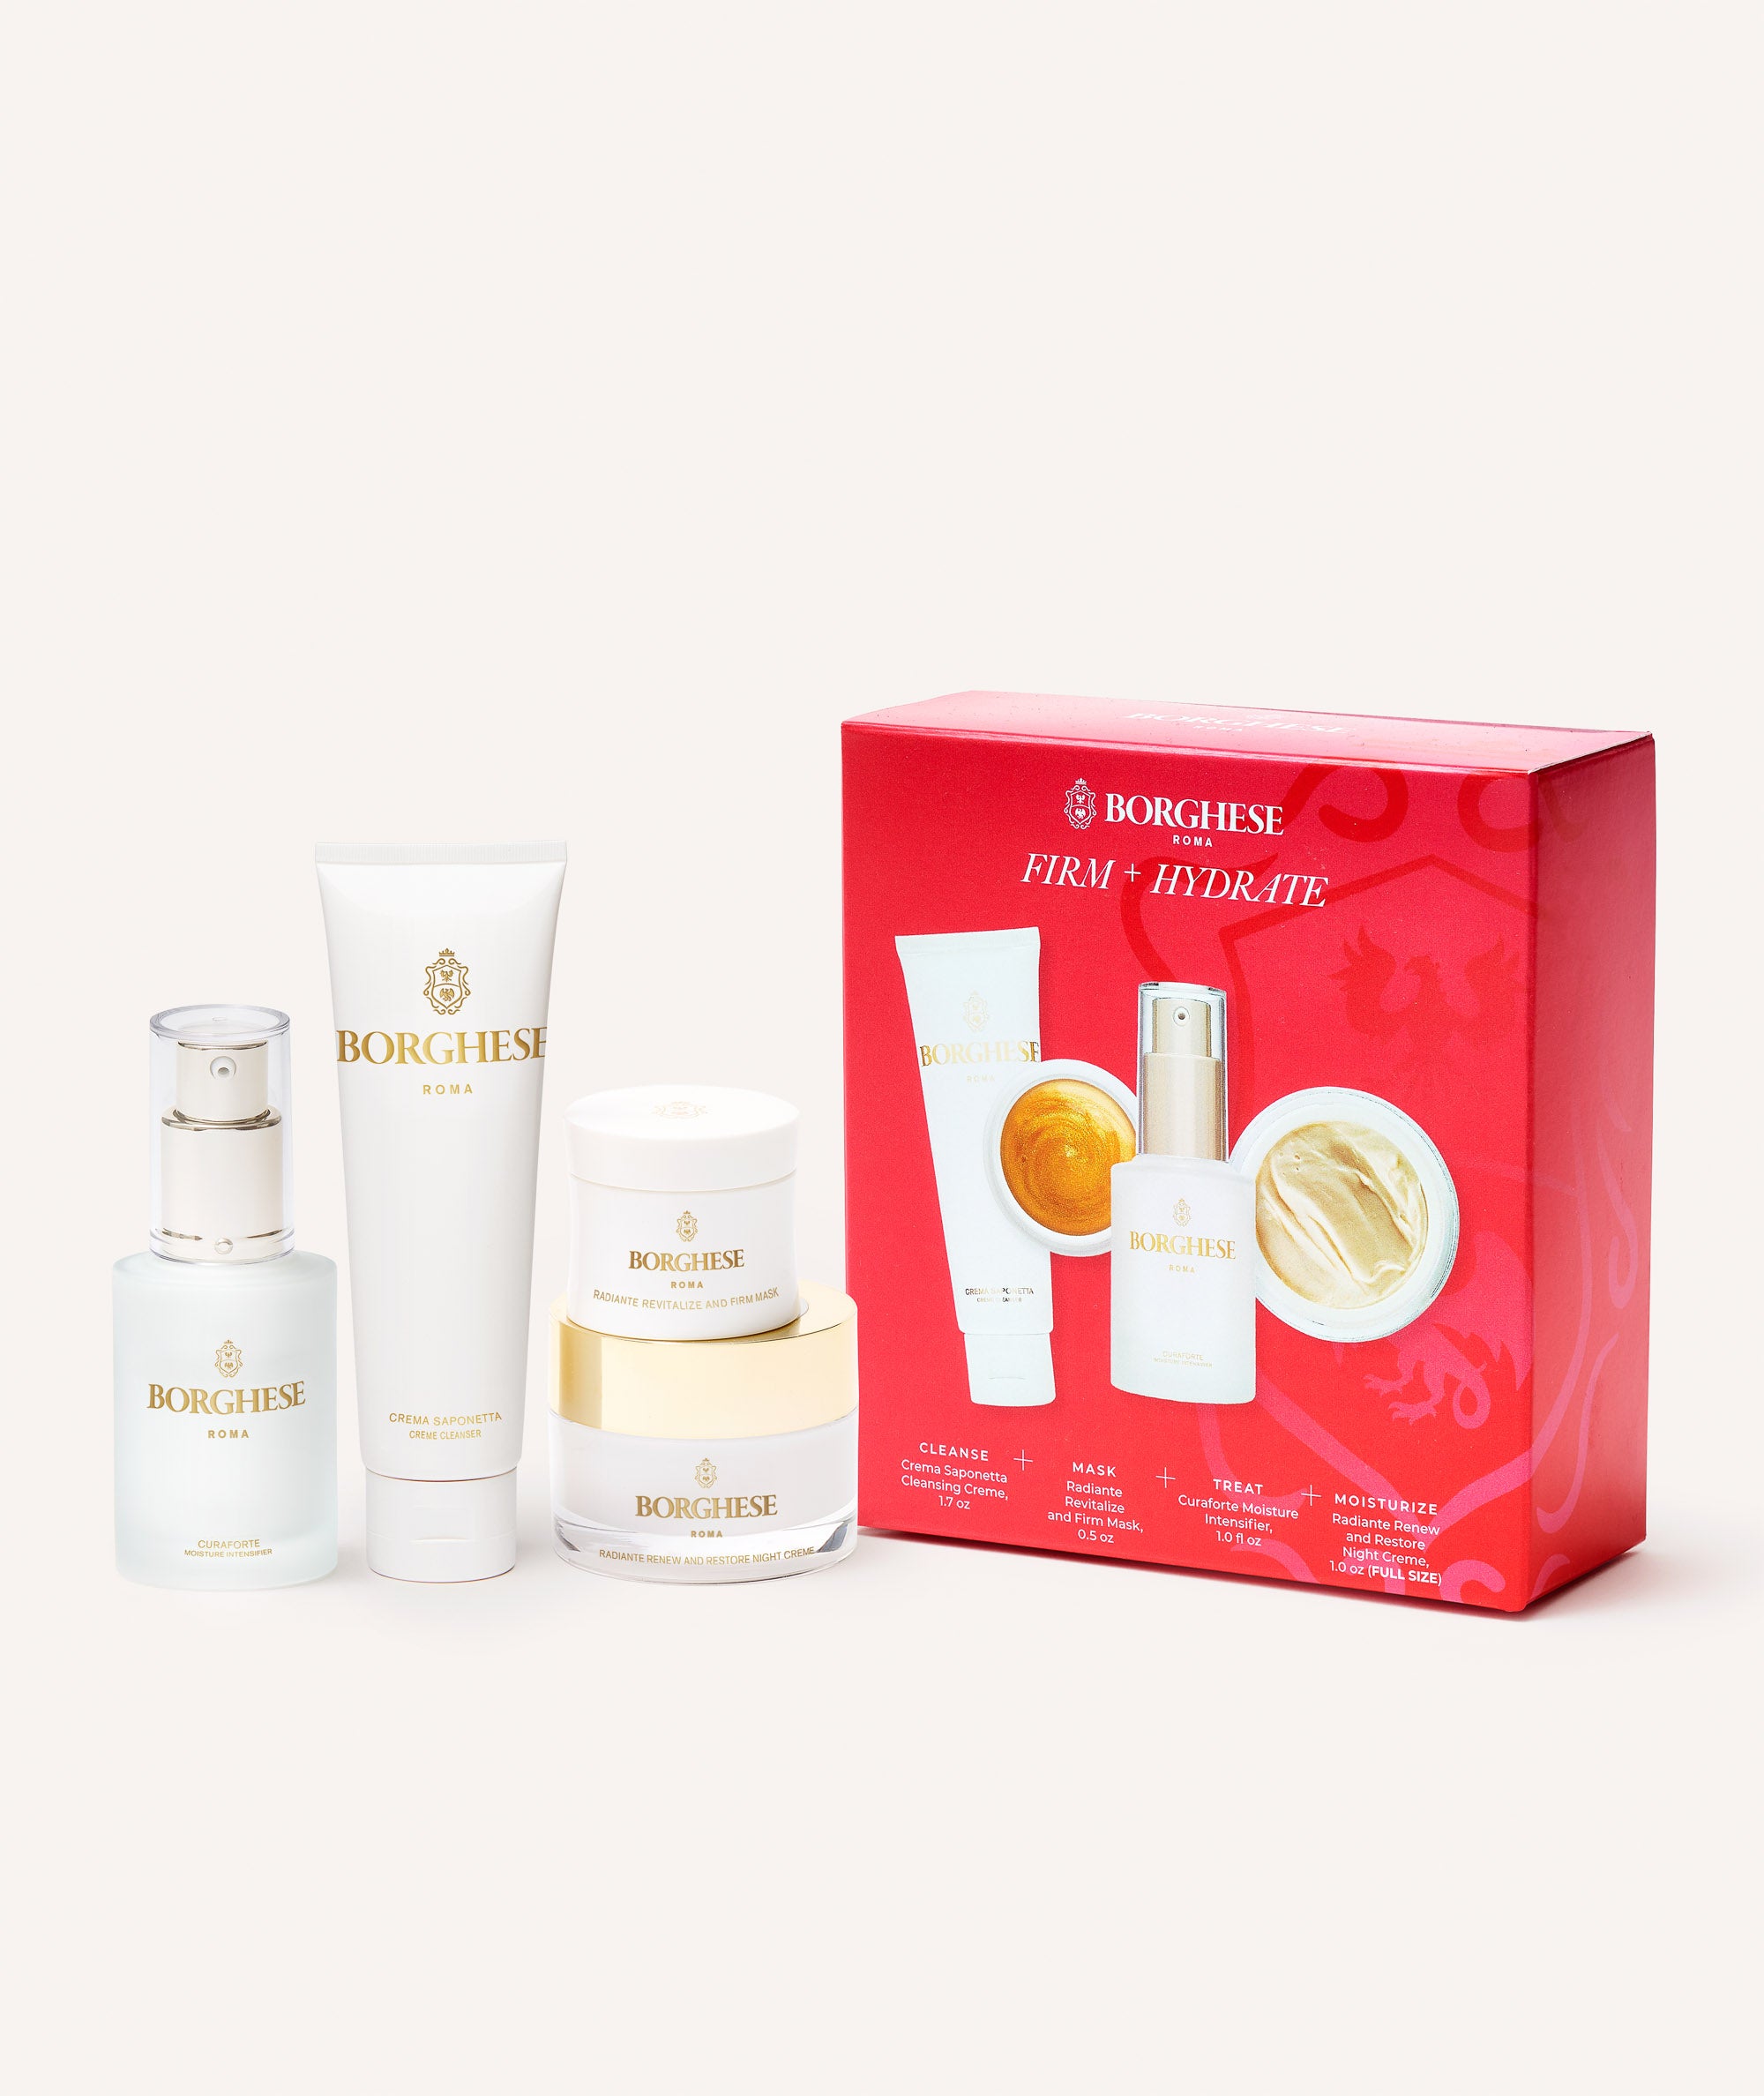 The Borghese 4-Piece Firm & Hydrate Gift Set contents and red gift box